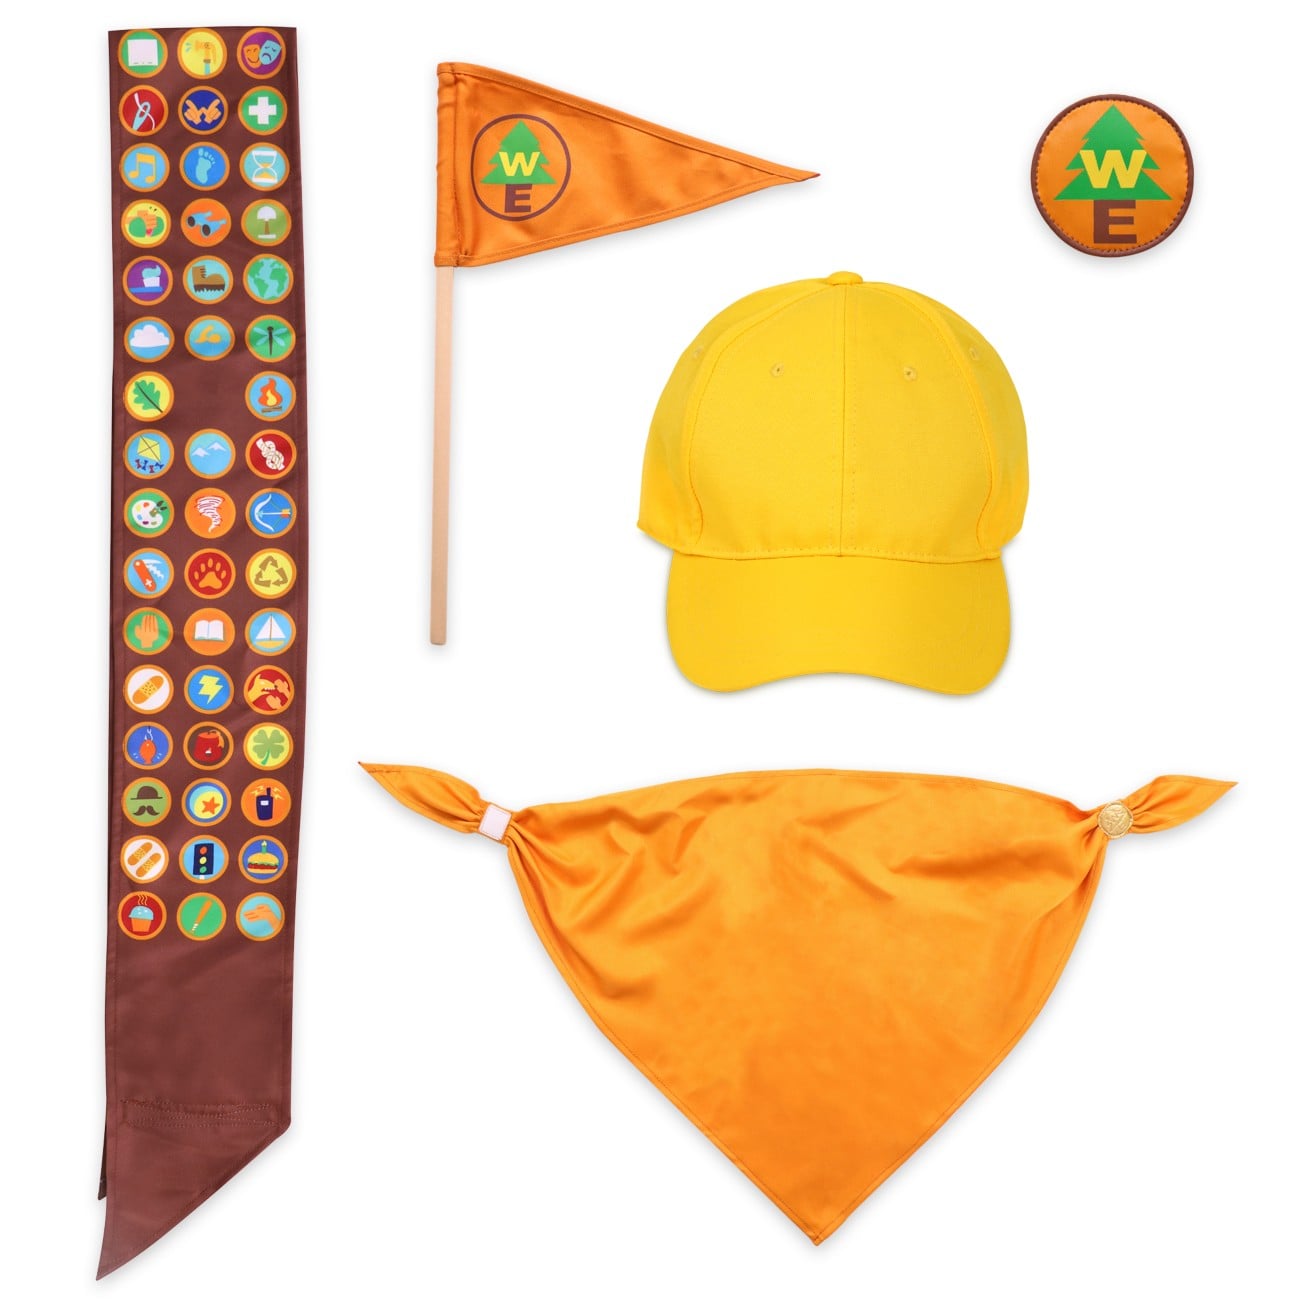 smertefuld Morgen Parat For Up Fans: Russell Costume Accessory Set | Bippity, Boppity, Boo! Shop  the Coolest Halloween Costumes From the Disney Store | POPSUGAR Smart  Living UK Photo 11